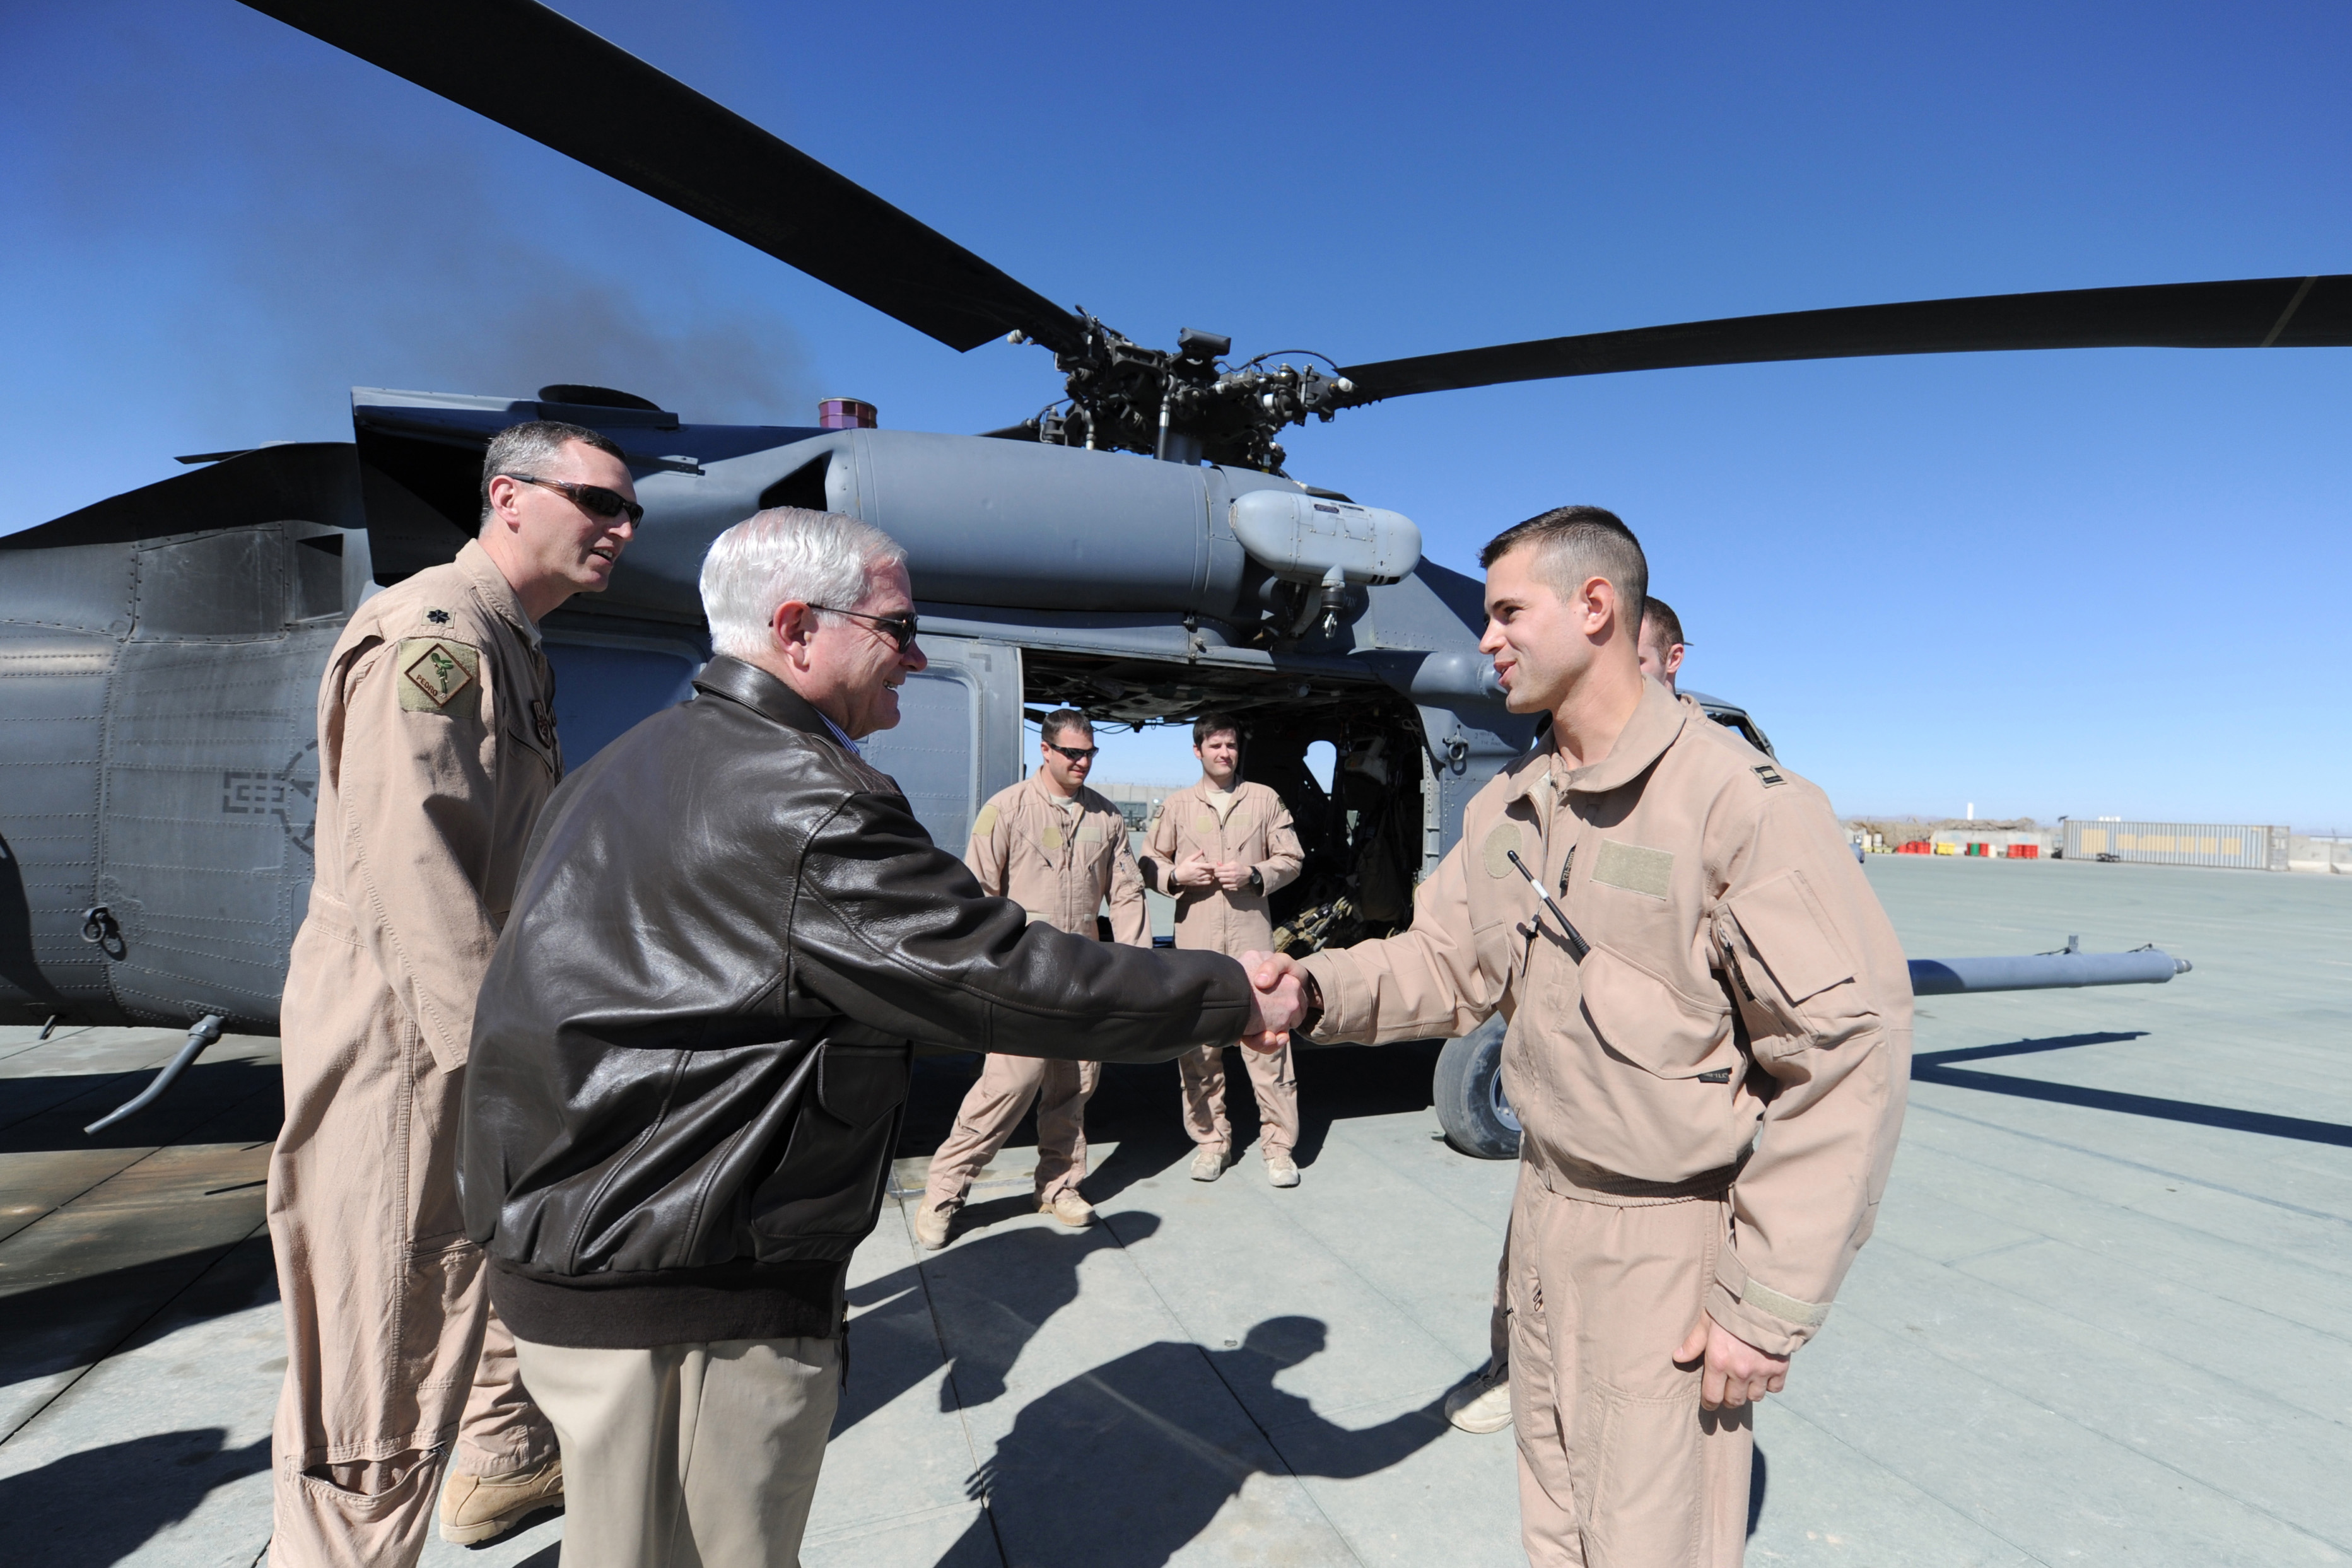 Defense.gov News Photo 110308-D-XH843-022 - Secretary of Defense Robert M. Gates shakes hands with members of the Pedro Medevac unit at Camp Leatherneck in Afghanistan on March 8, 2011. 